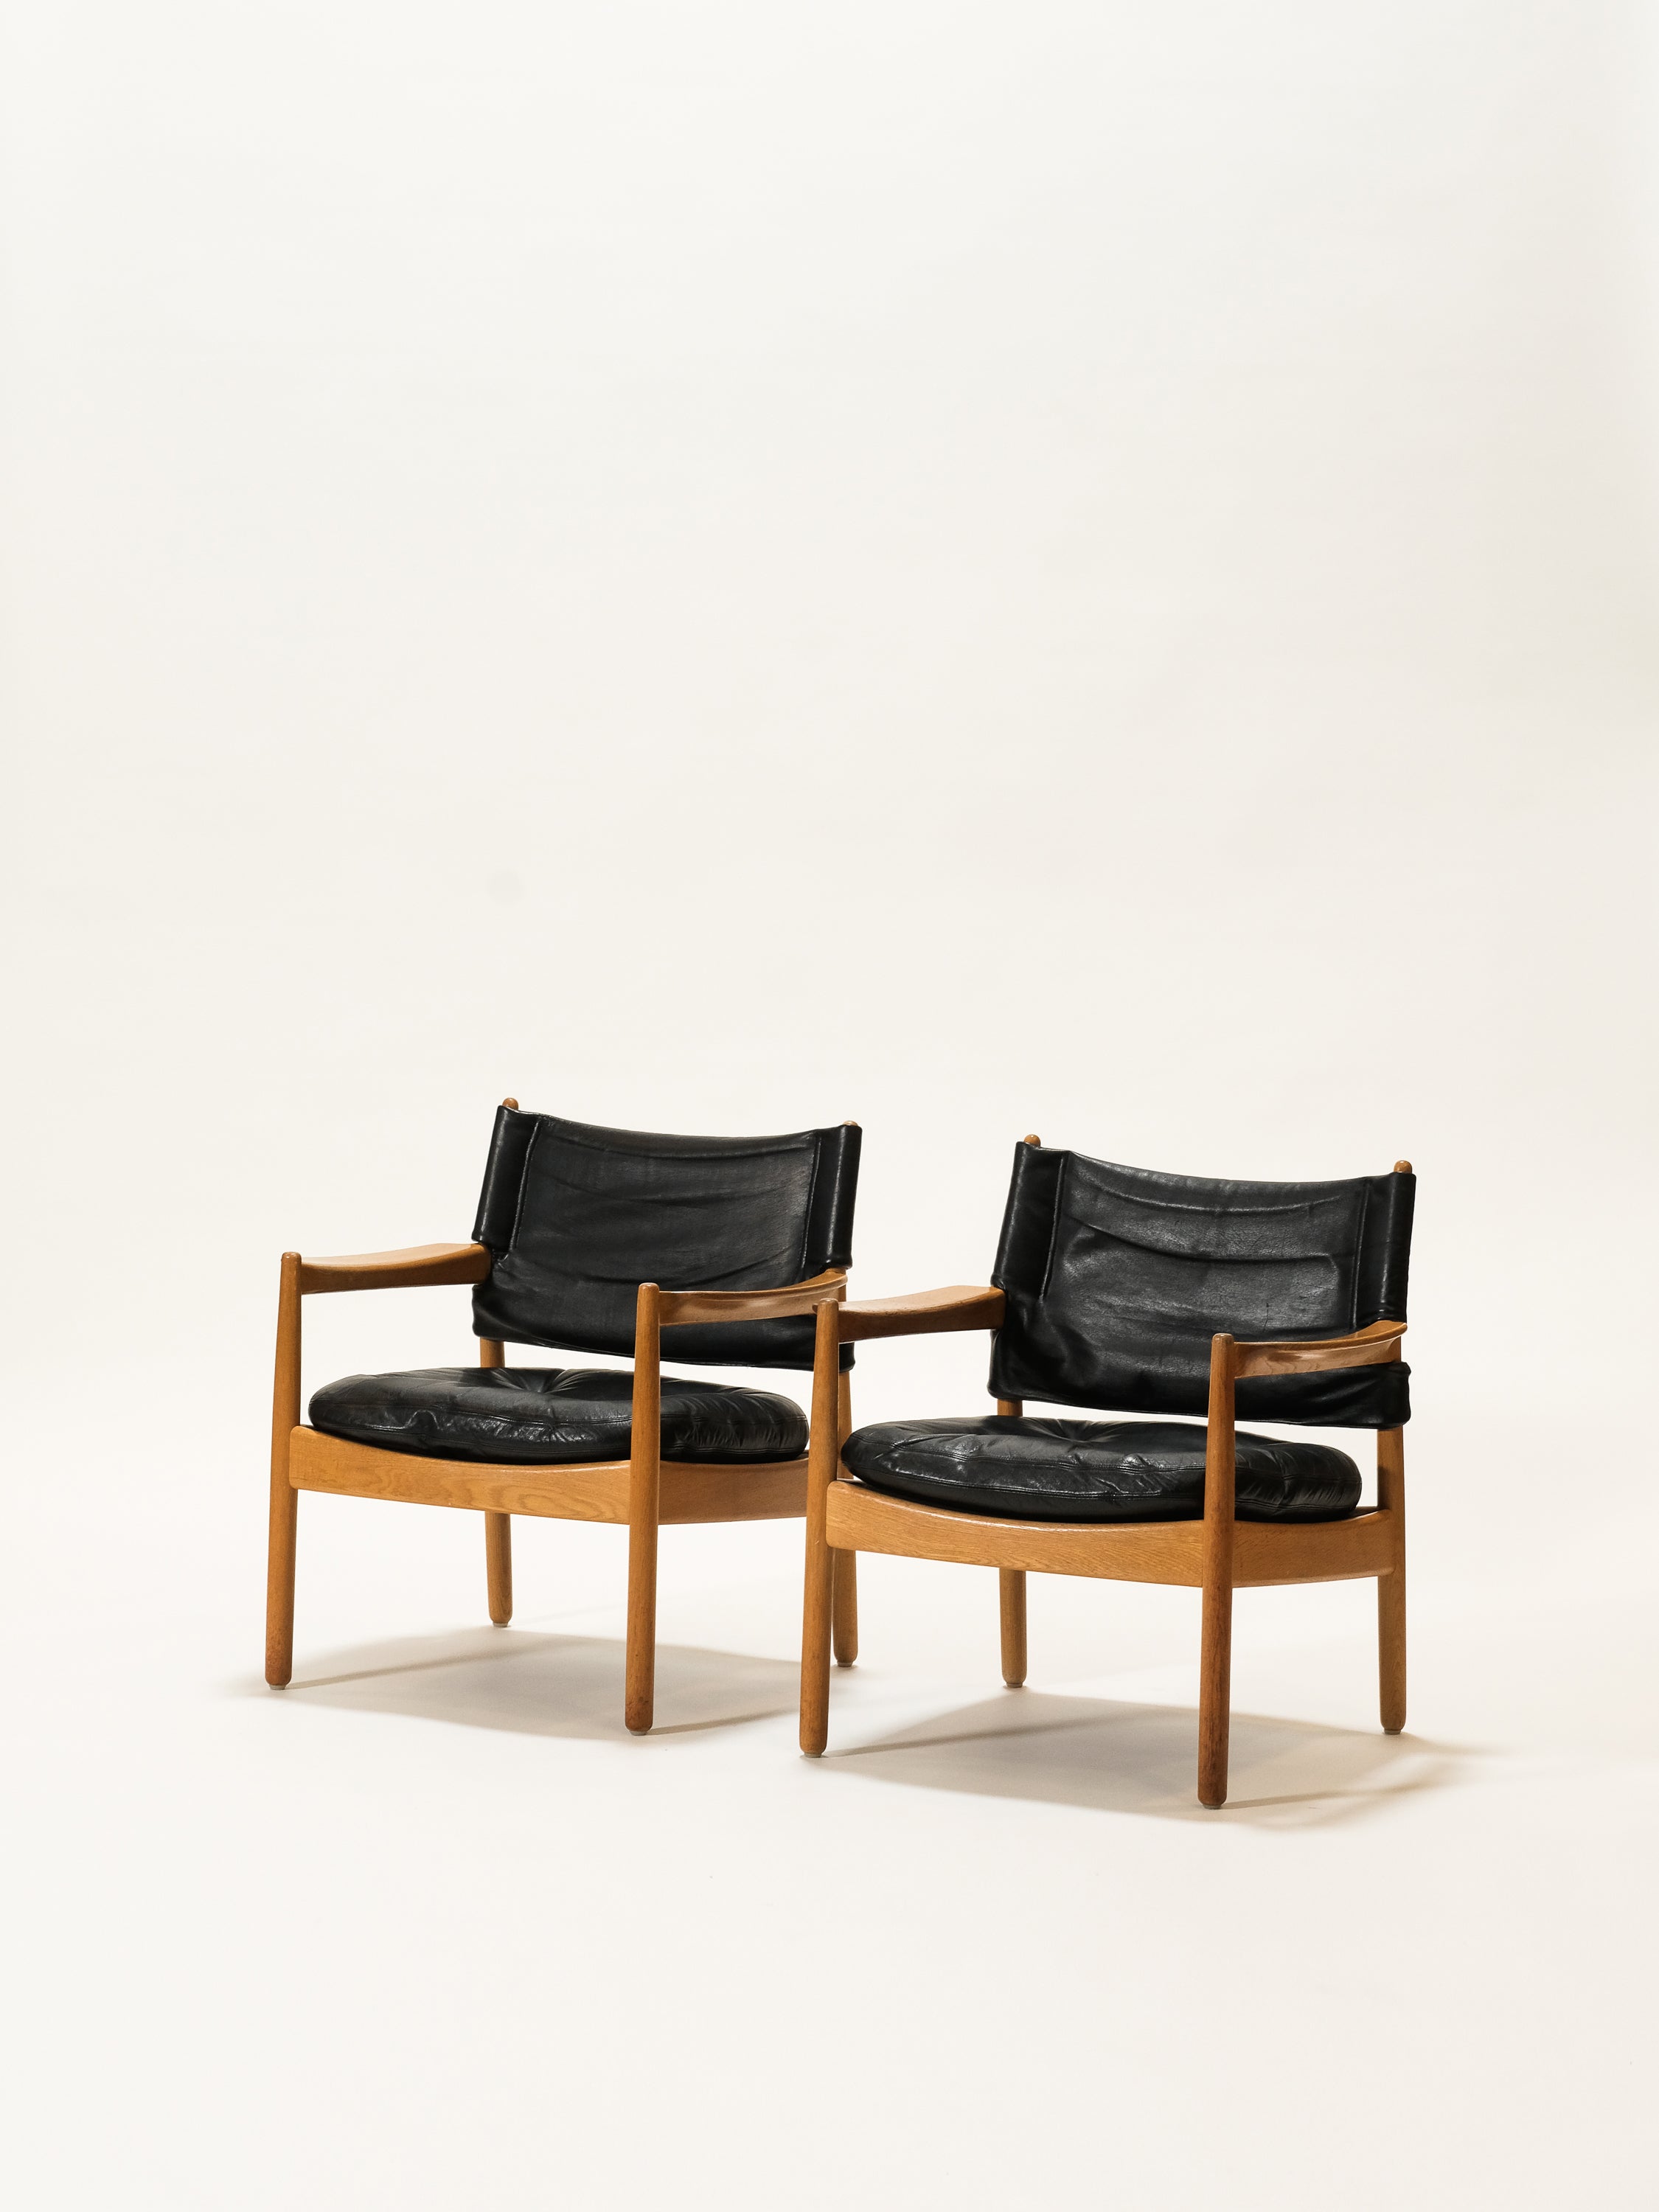 Pair of Oak & Leather Easy Chairs by Gunnar Myrstrand for Källemo, Sweden, 1960s